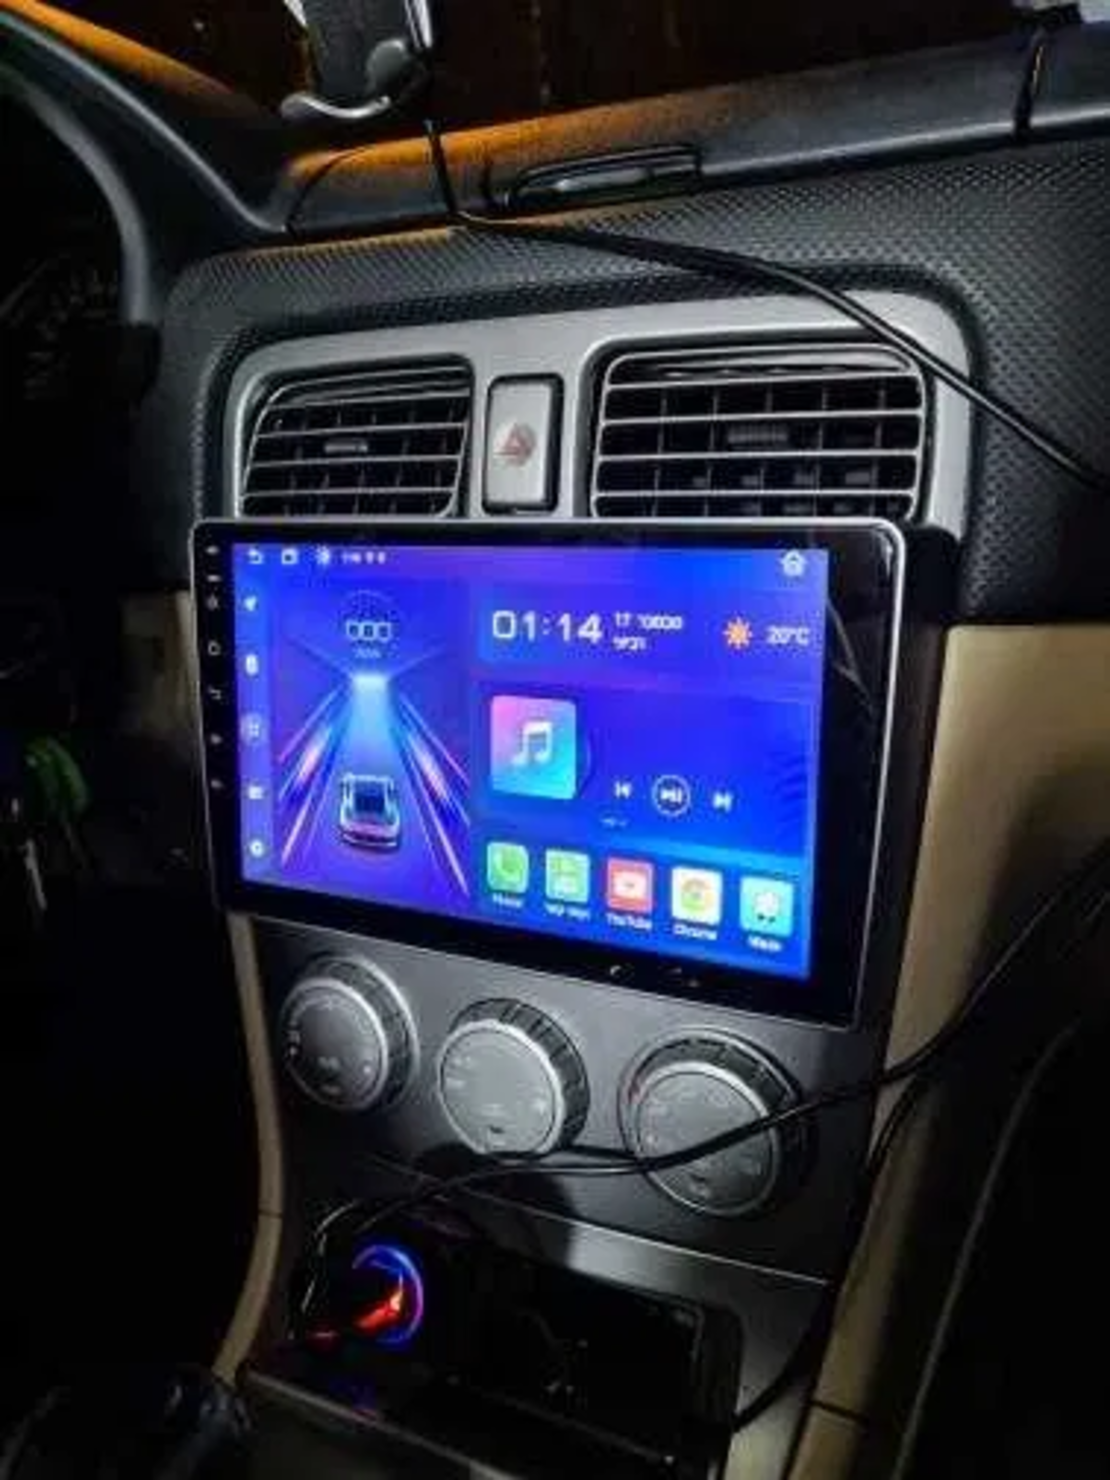 Subaru Forester 2002 - 2008 Android Multimedia/Navigation